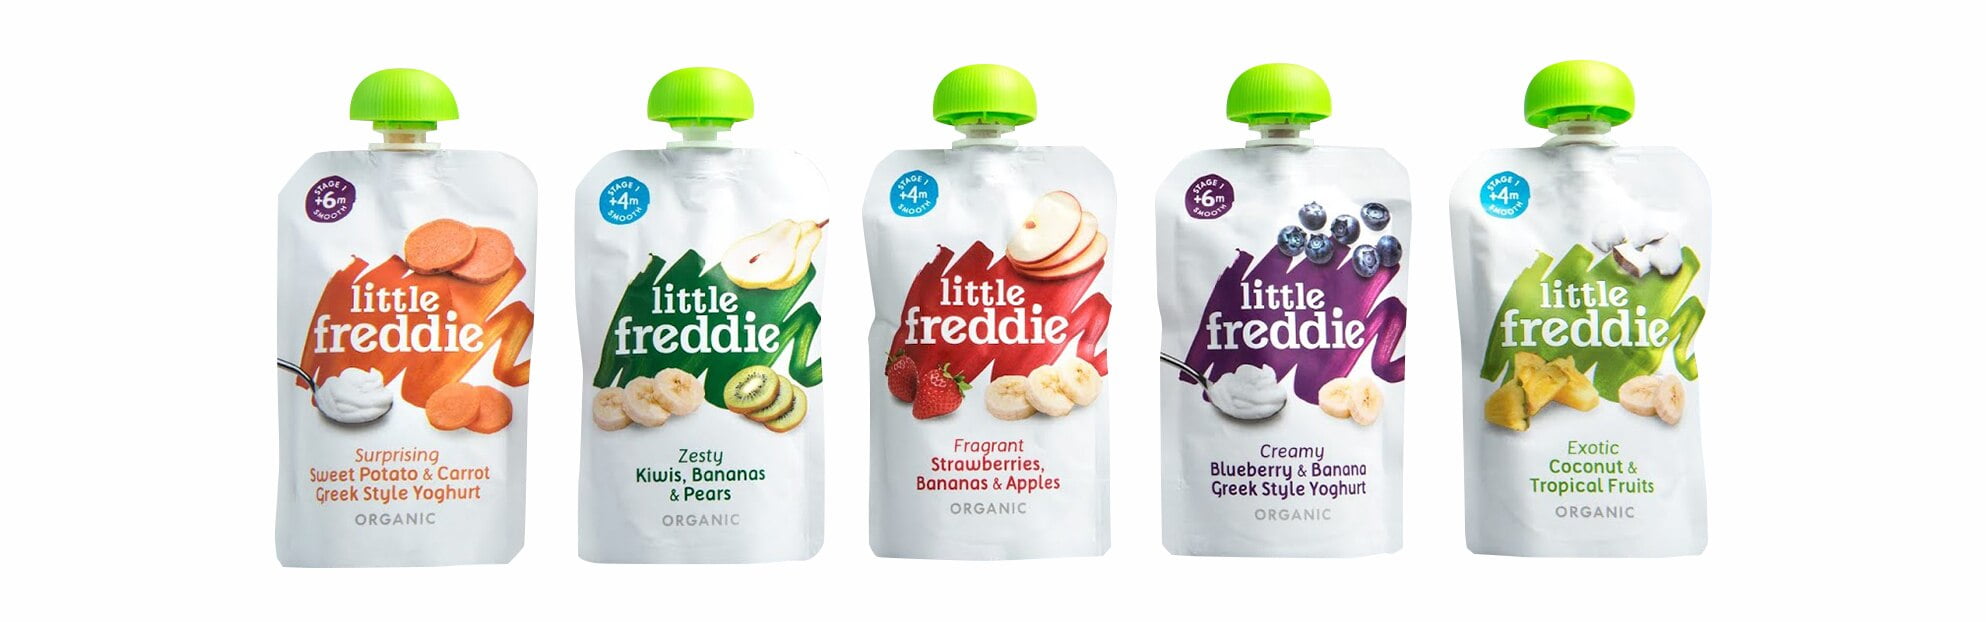 organic-baby-fruit-packaging-stand-up-premium-packaging-pouches.jpg